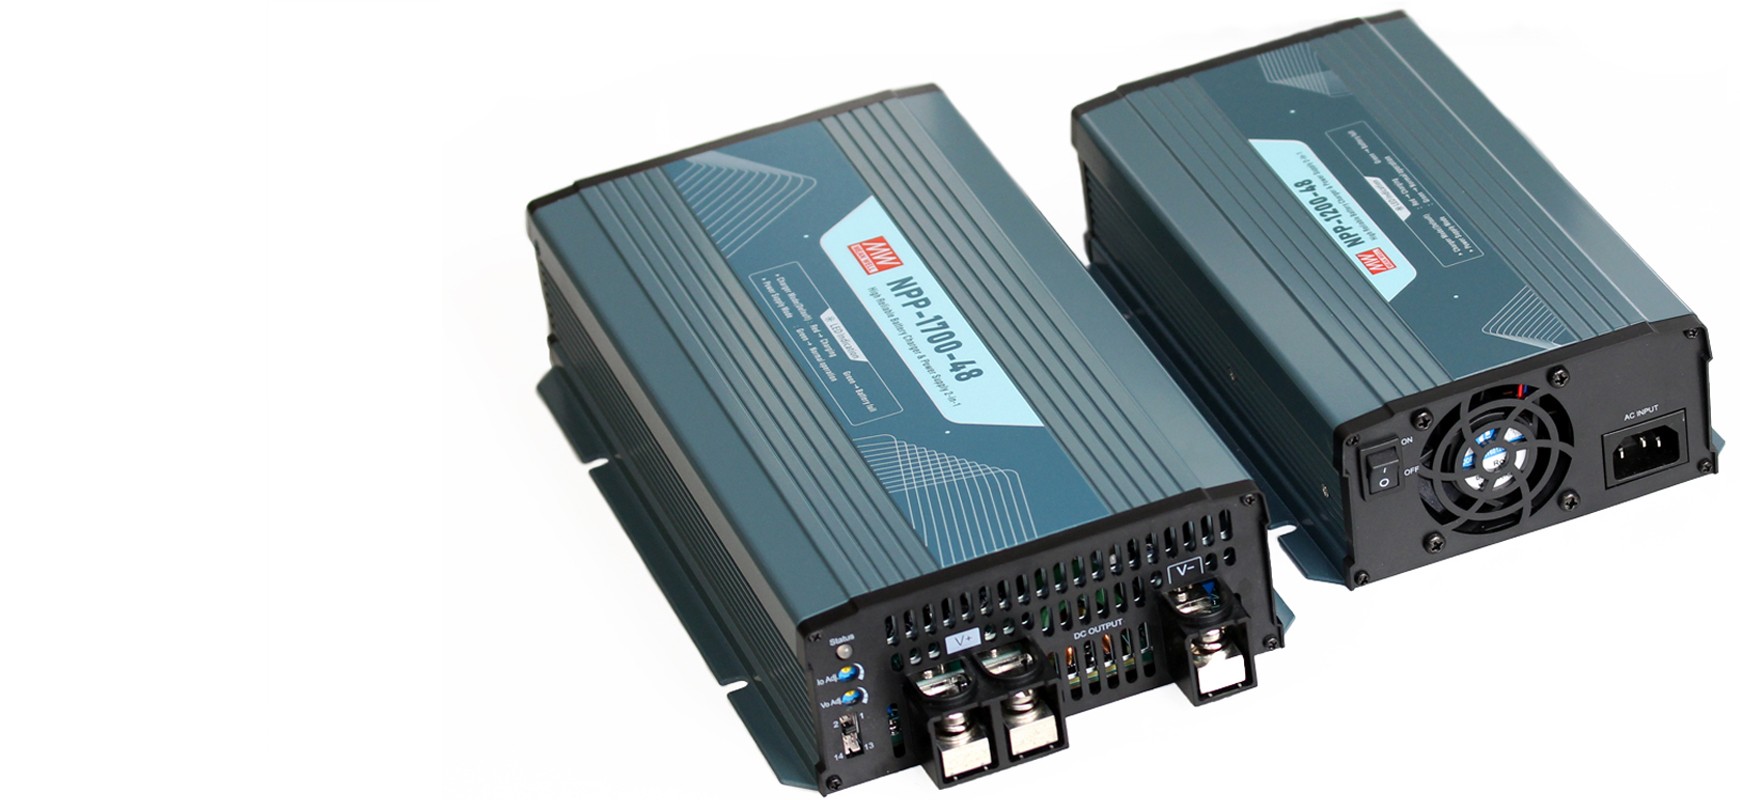 Mean Well battery charger series NPP-1700